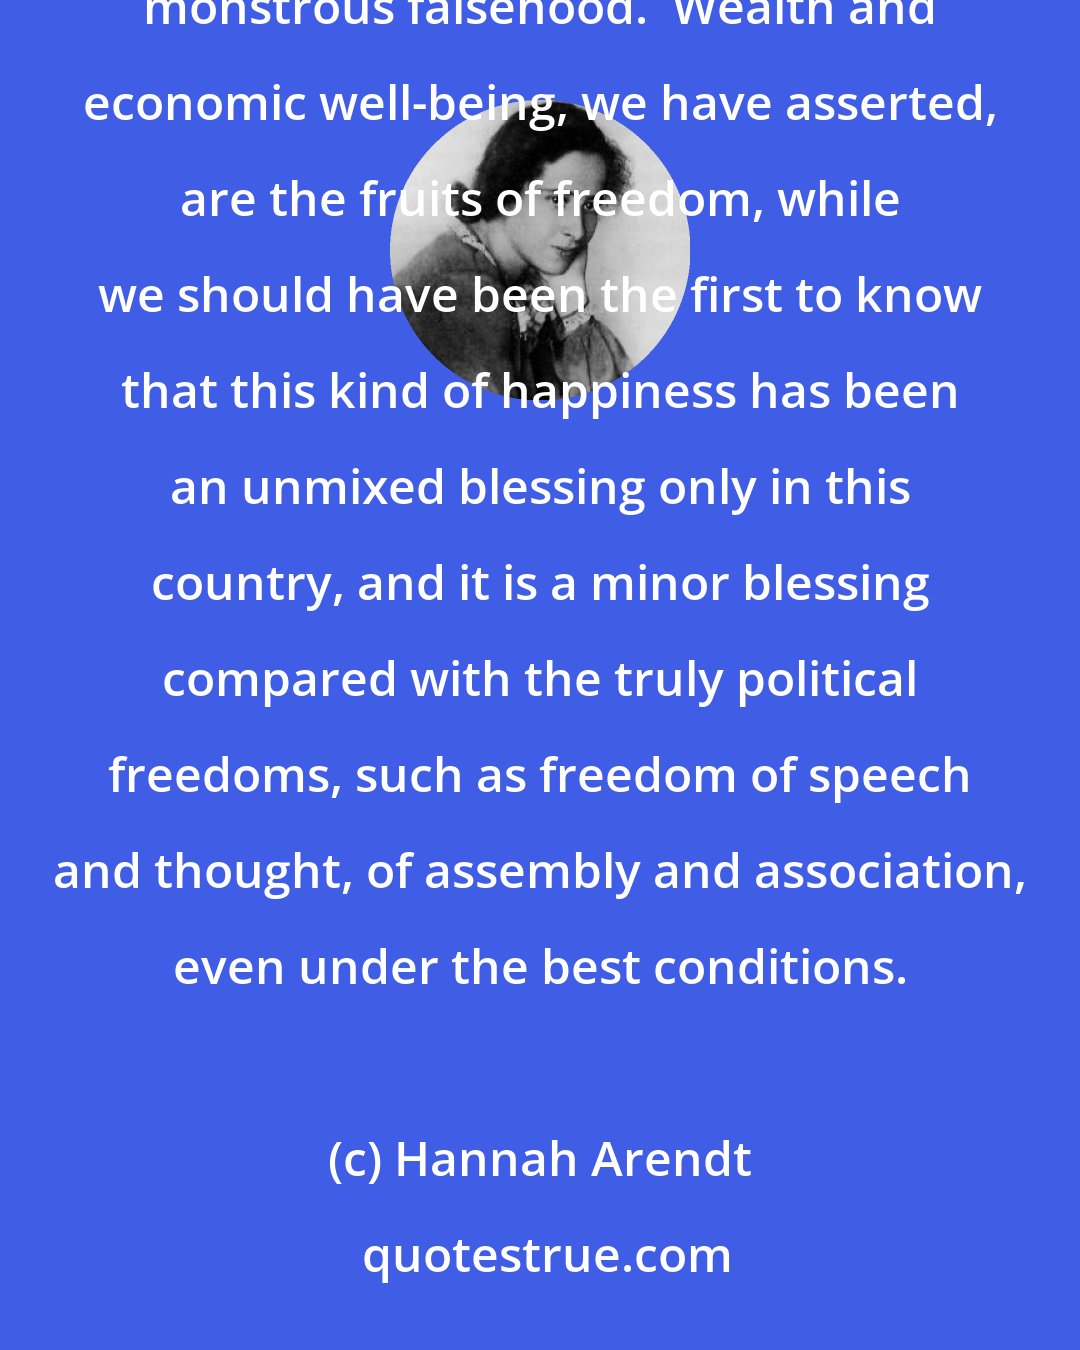 Hannah Arendt: When we were told that by freedom we understood free enterprise, we did very little to dispel this monstrous falsehood.  Wealth and economic well-being, we have asserted, are the fruits of freedom, while we should have been the first to know that this kind of happiness has been an unmixed blessing only in this country, and it is a minor blessing compared with the truly political freedoms, such as freedom of speech and thought, of assembly and association, even under the best conditions.